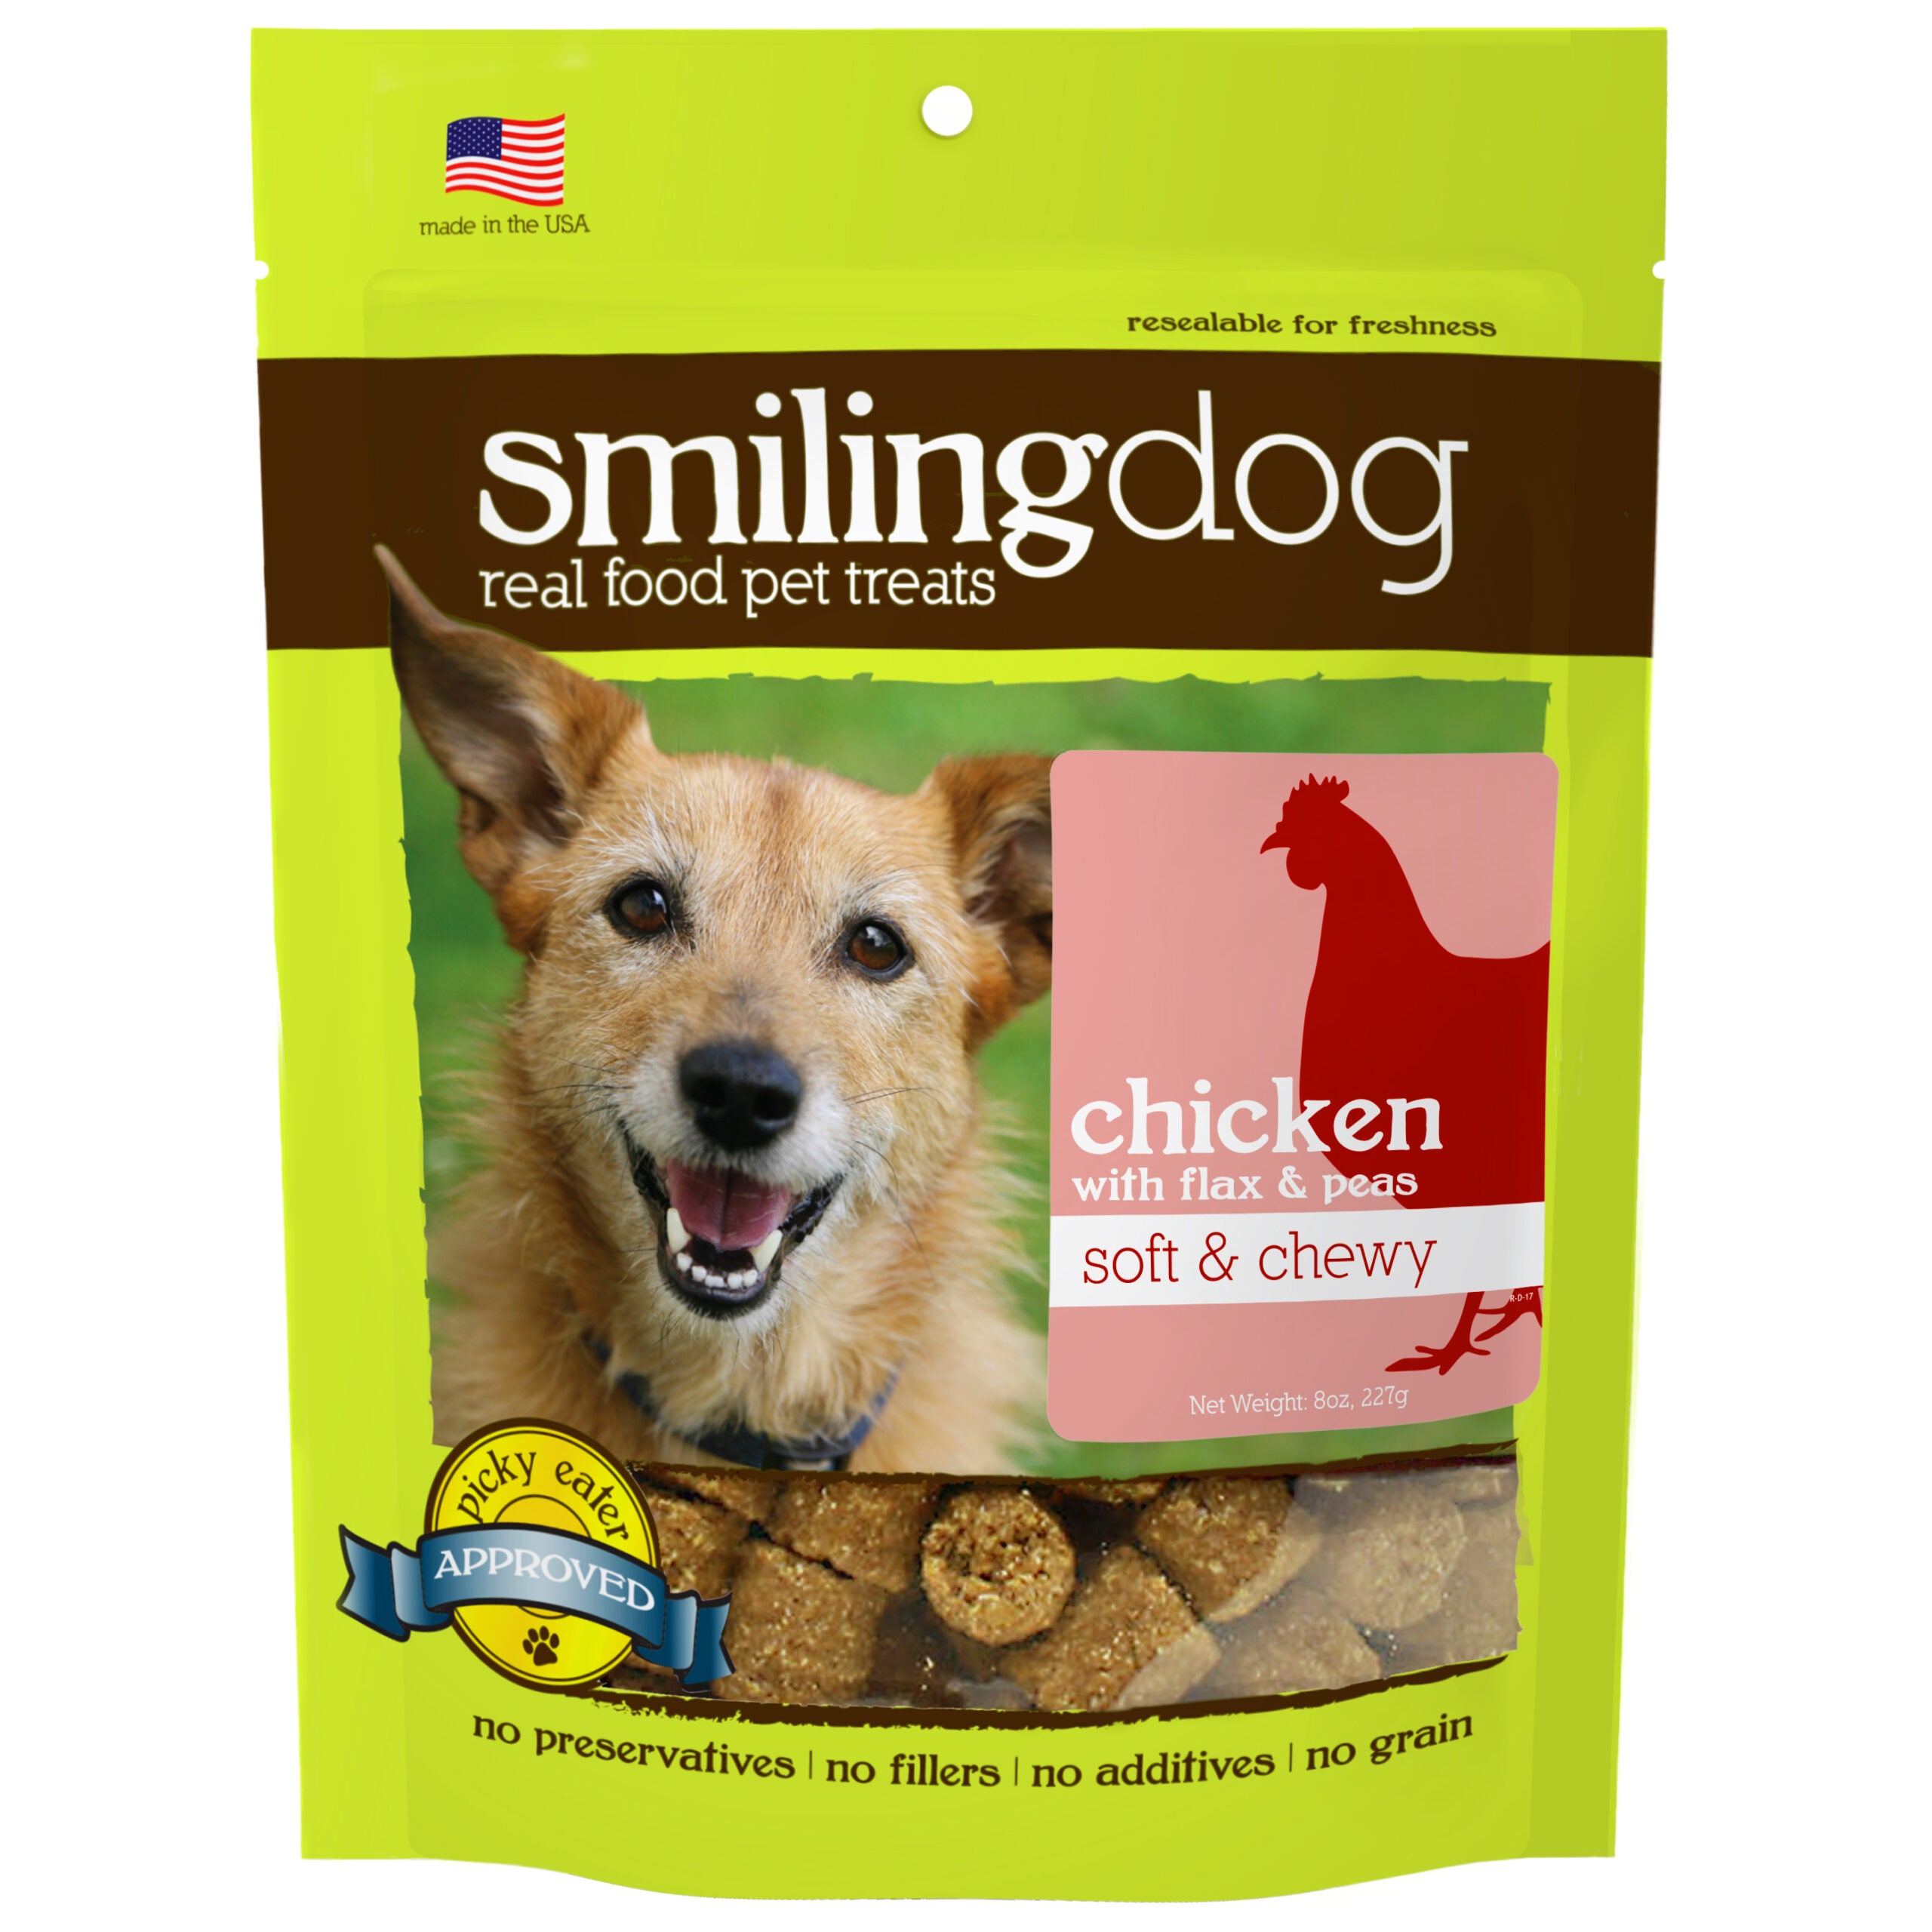 Herbsmith Smiling Dog Soft & Chewy Treats for Dogs (4 pack)